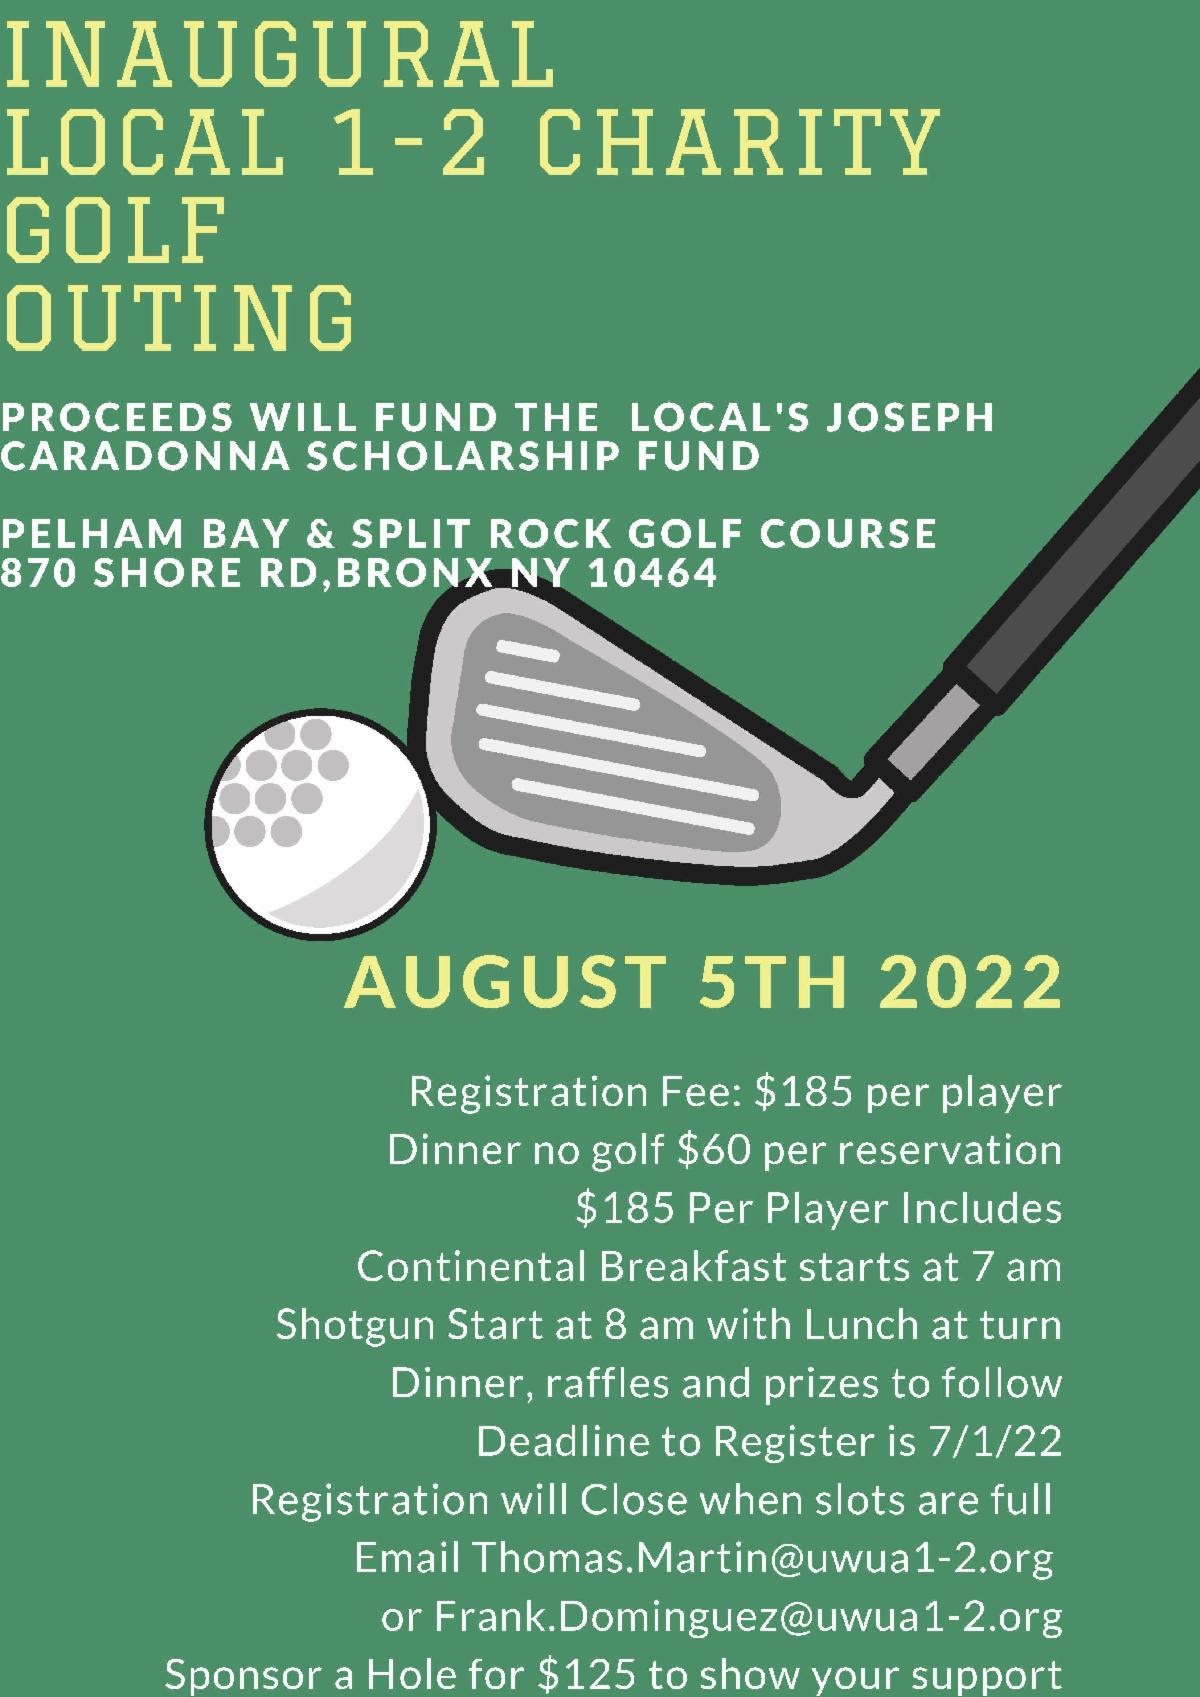 Outing Flyer